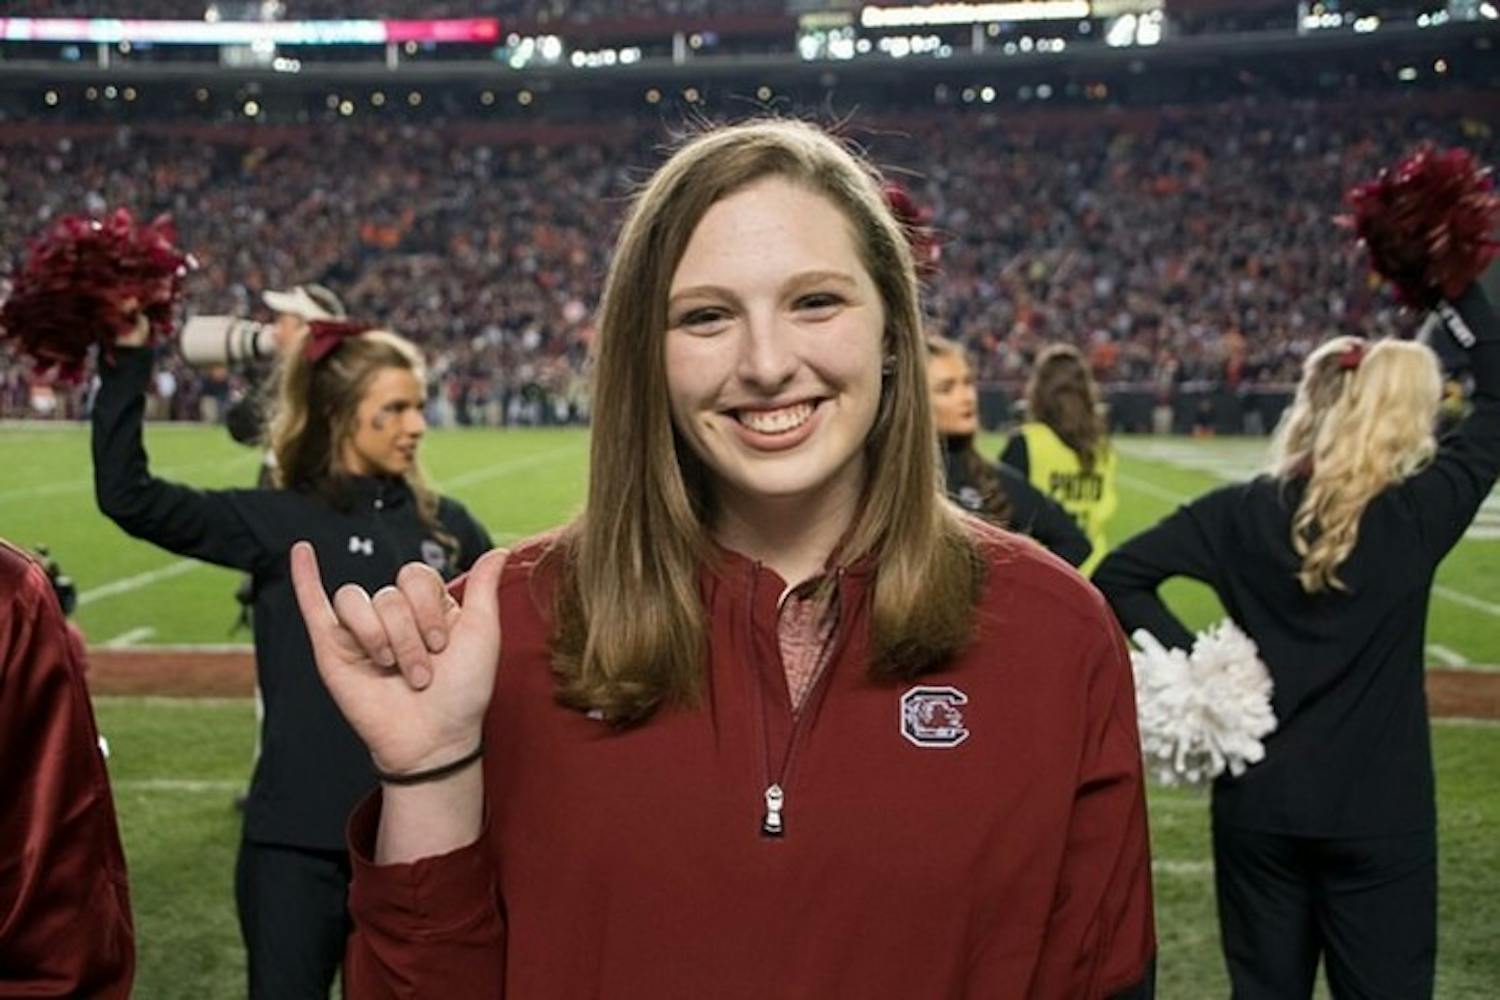 Alexis Kiser holding up the "Spur's Up" hand sign. Kiser became Cocky during her second year at USC.